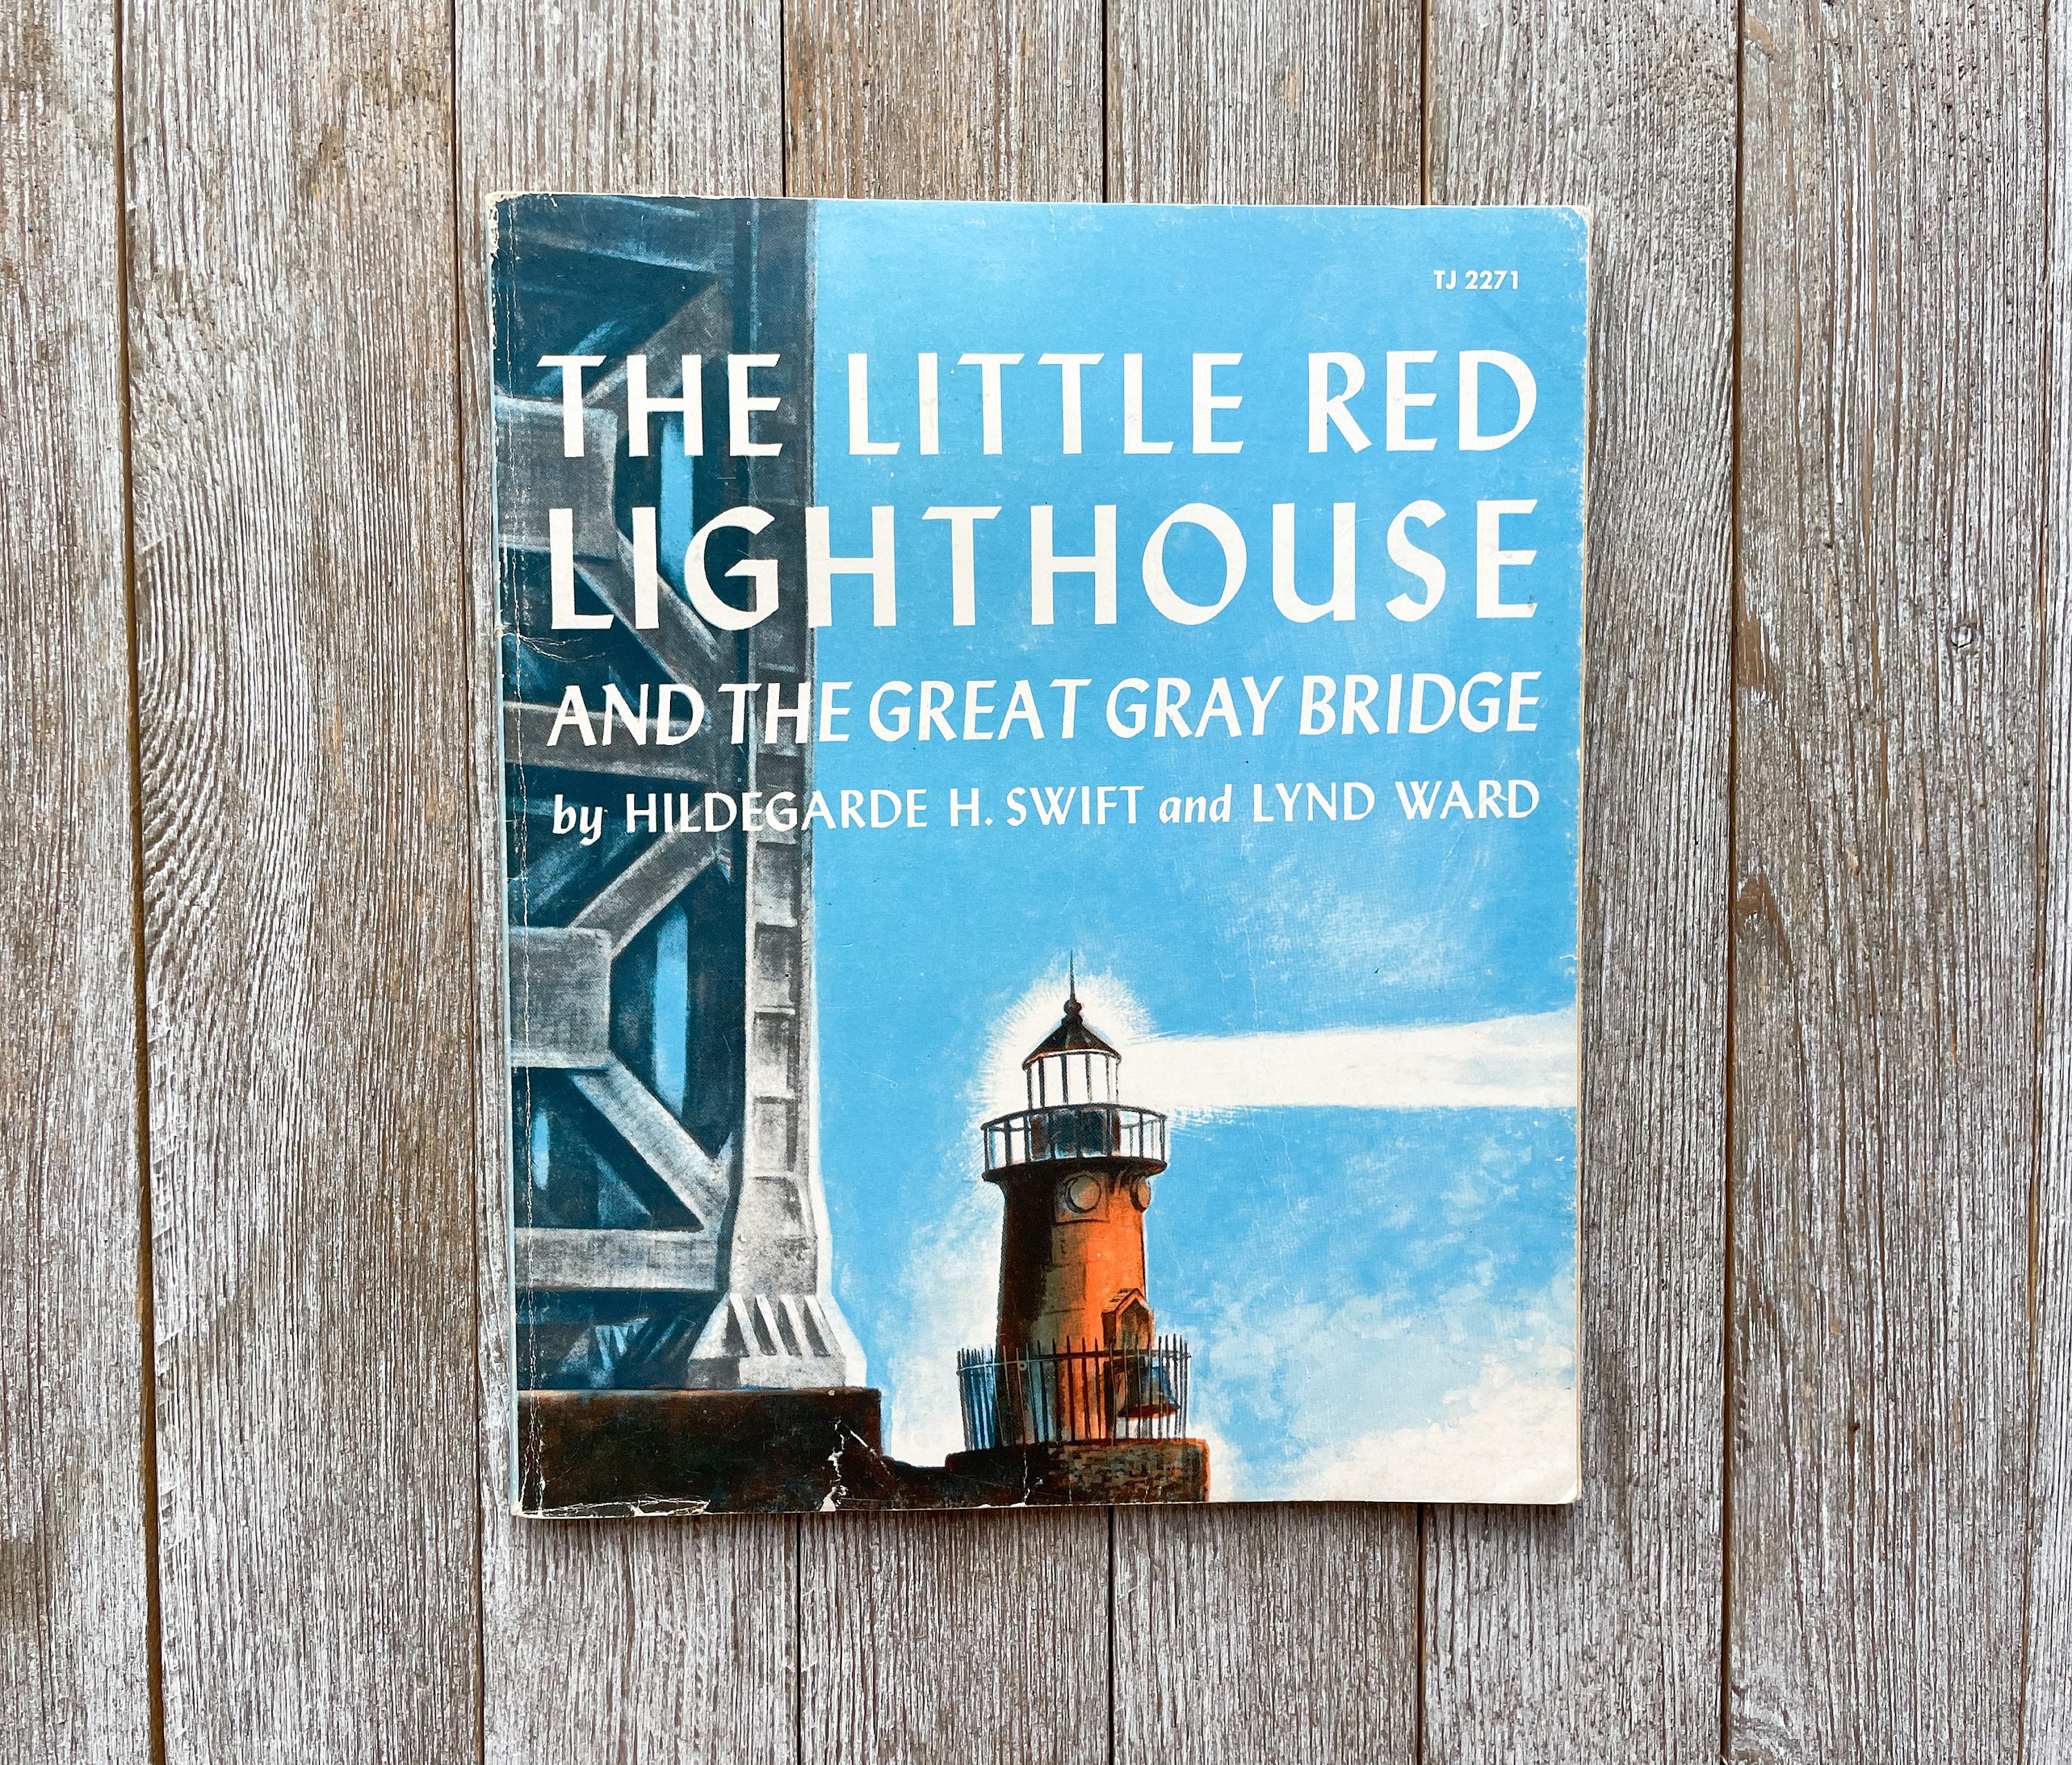 The Little Red Lighthouse and the Great Grey Bridge by